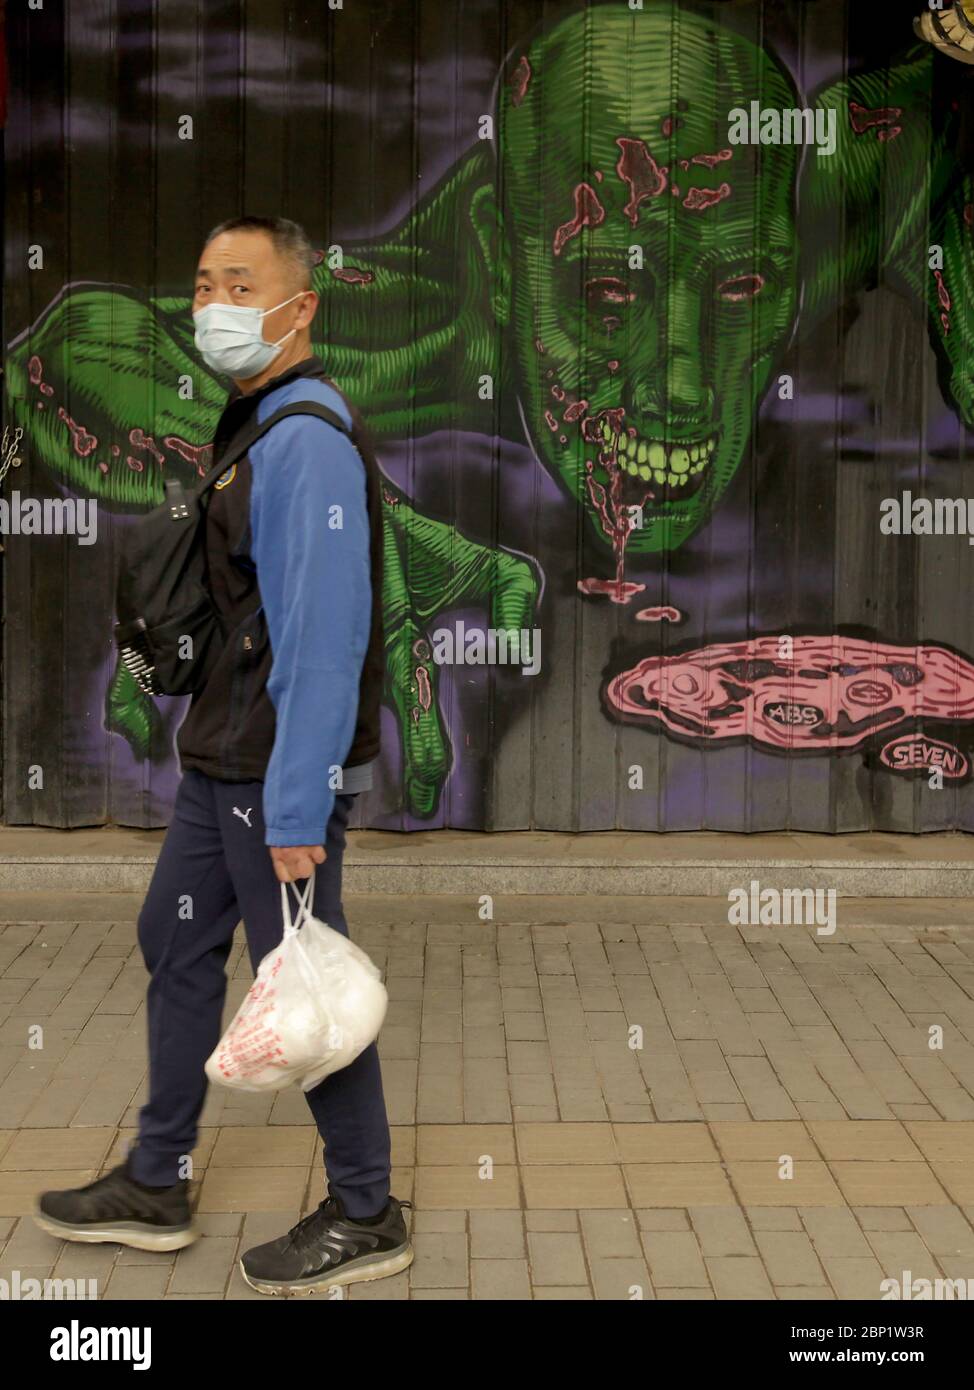 Beijing, China. 17th May, 2020. Chinese continue wearing protective face masks outside as the coronavirus pandemic threat continues in Beijing on Sunday, May 17, 2020. Wuhan, a city of 11 million, where the Covid-19 pandemic originated, reported new cases over the weekend, its first new infections in over a month. China is aggressively investigating the new cluster, announcing a plan to test the entire city in 10 days. Photo by Stephen Shaver/UPI Credit: UPI/Alamy Live News Stock Photo